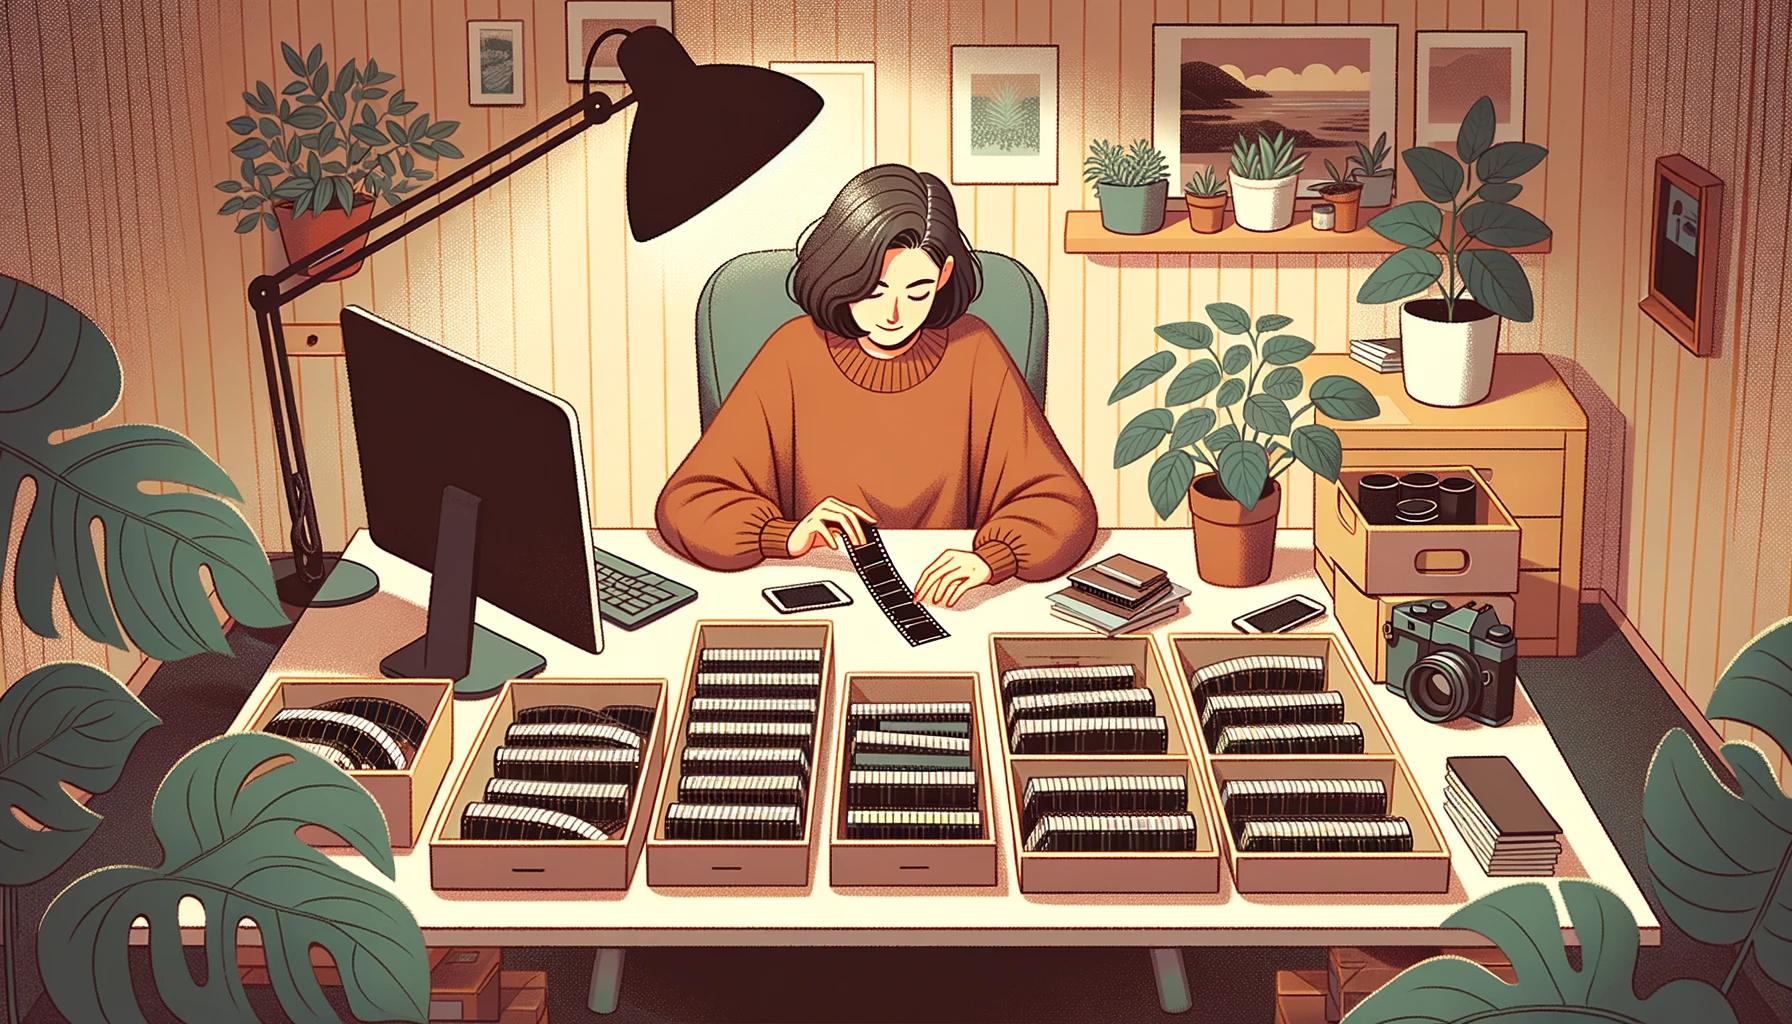 An illustration of a woman organizing her negative film collection